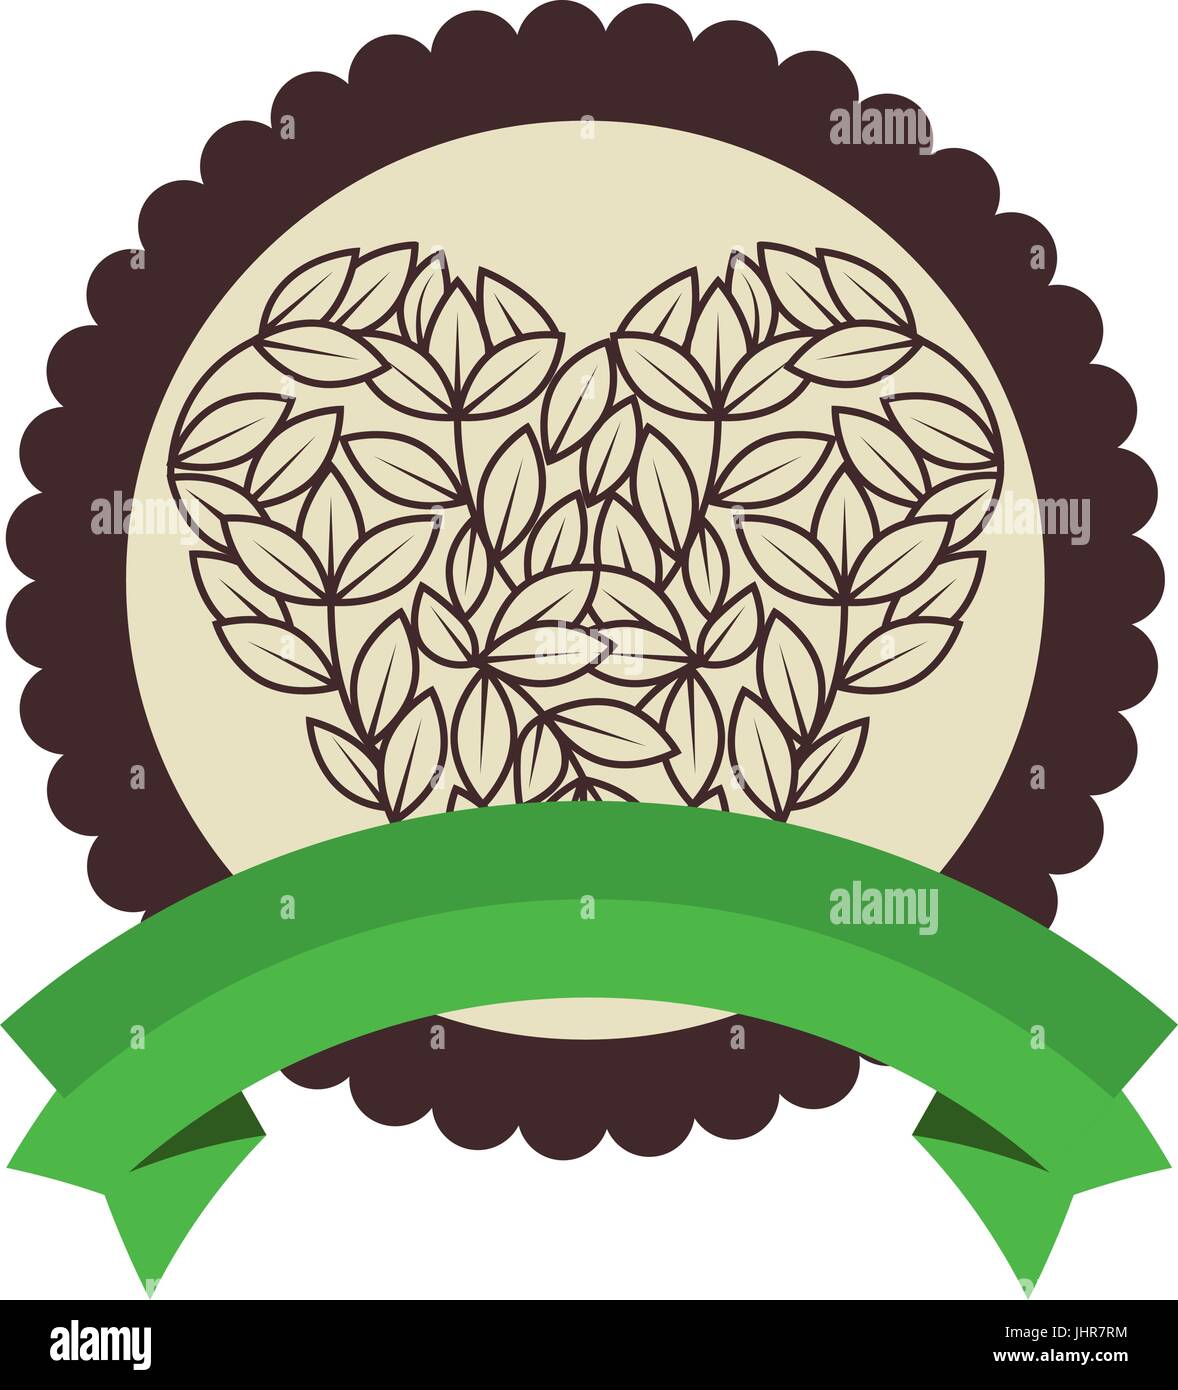 seal stamp with leaves in heart shape icon over white background vector illustration Stock Vector